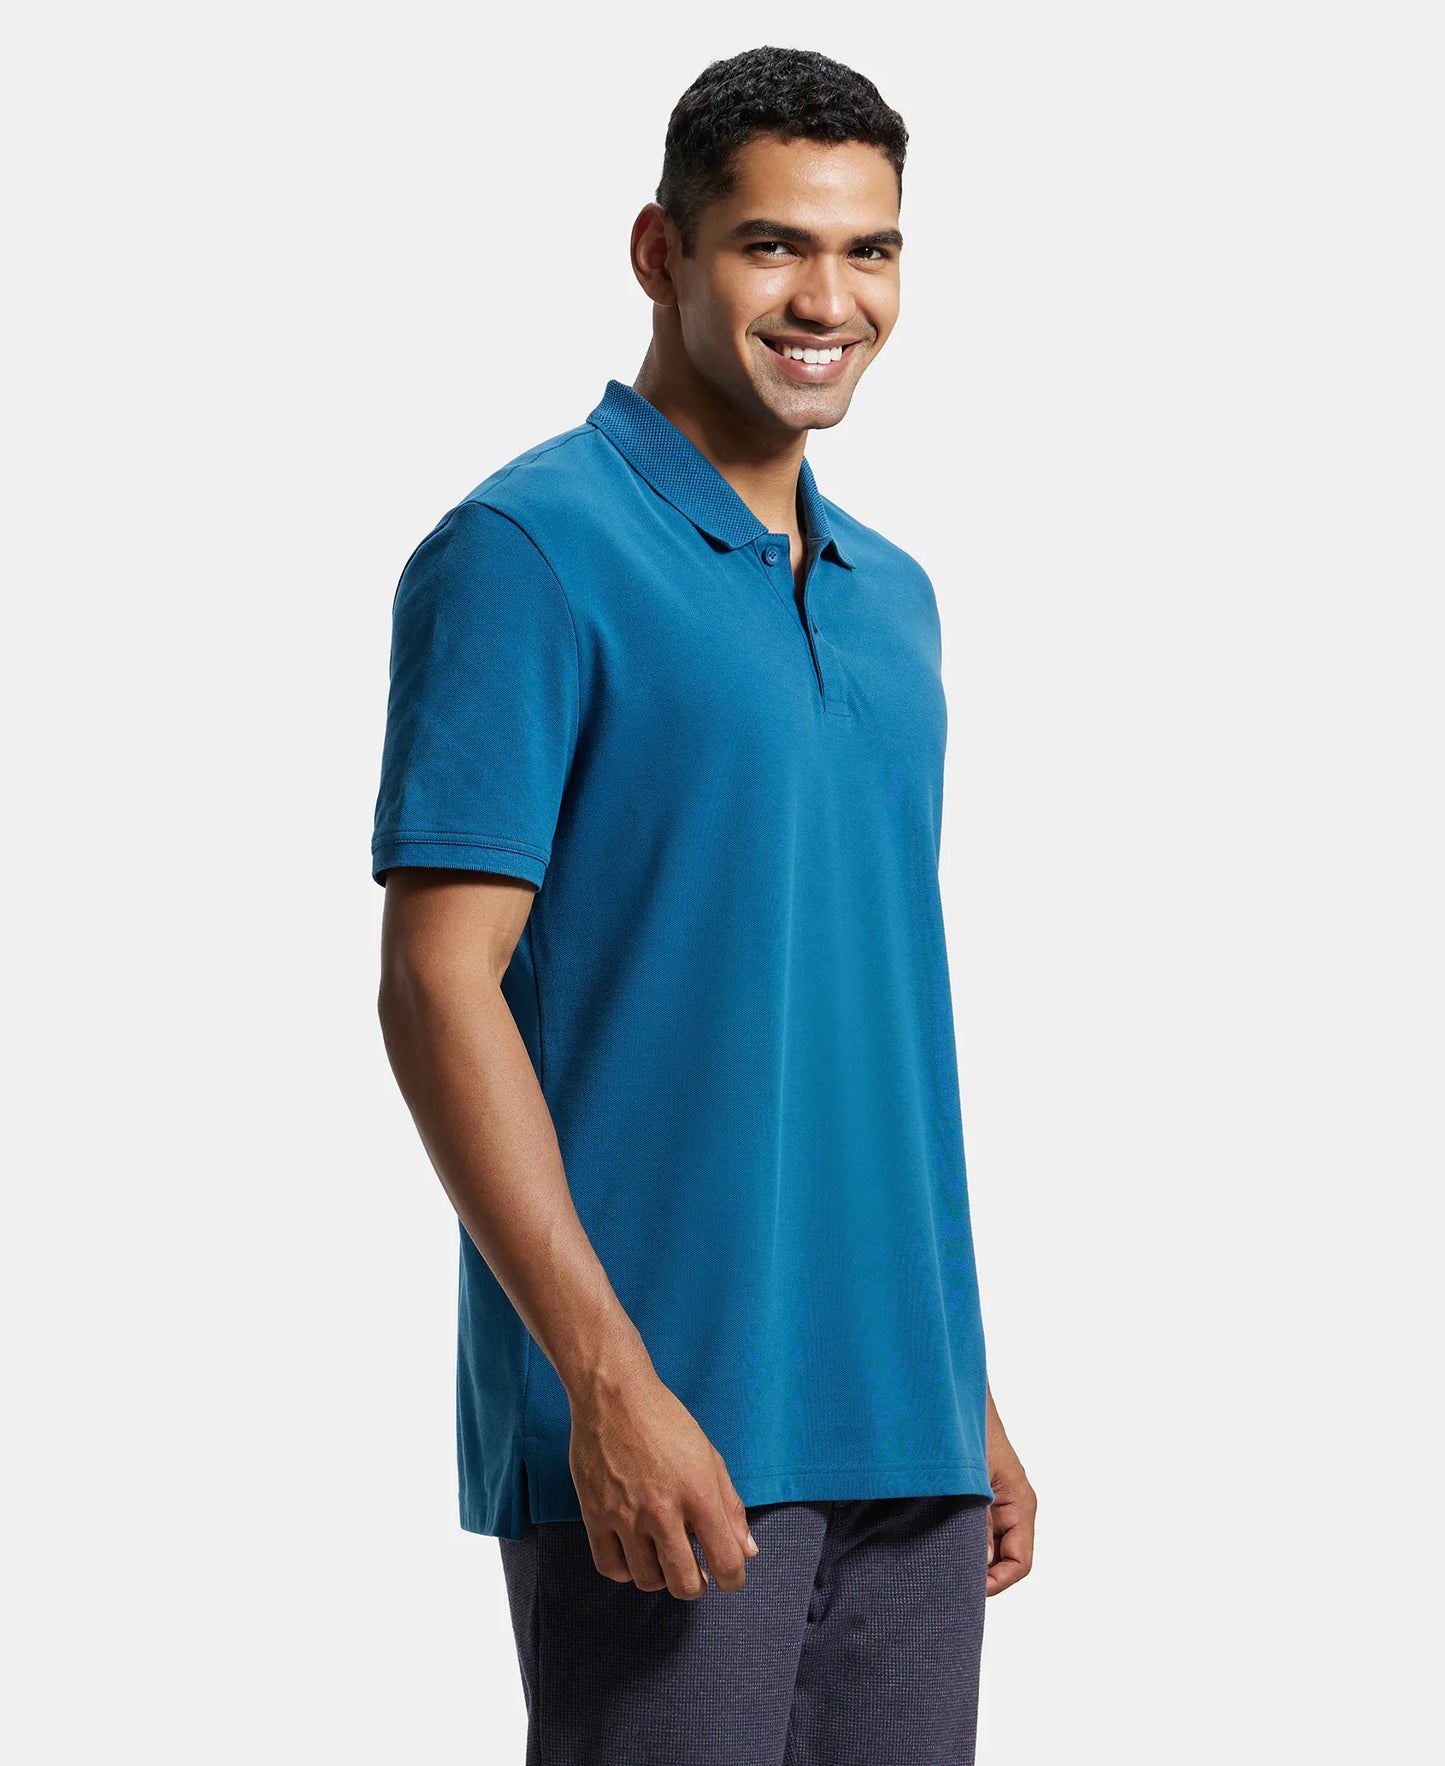 Super Combed Cotton Rich Pique Fabric Solid Half Sleeve Polo T-Shirt - Seaport Teal-2